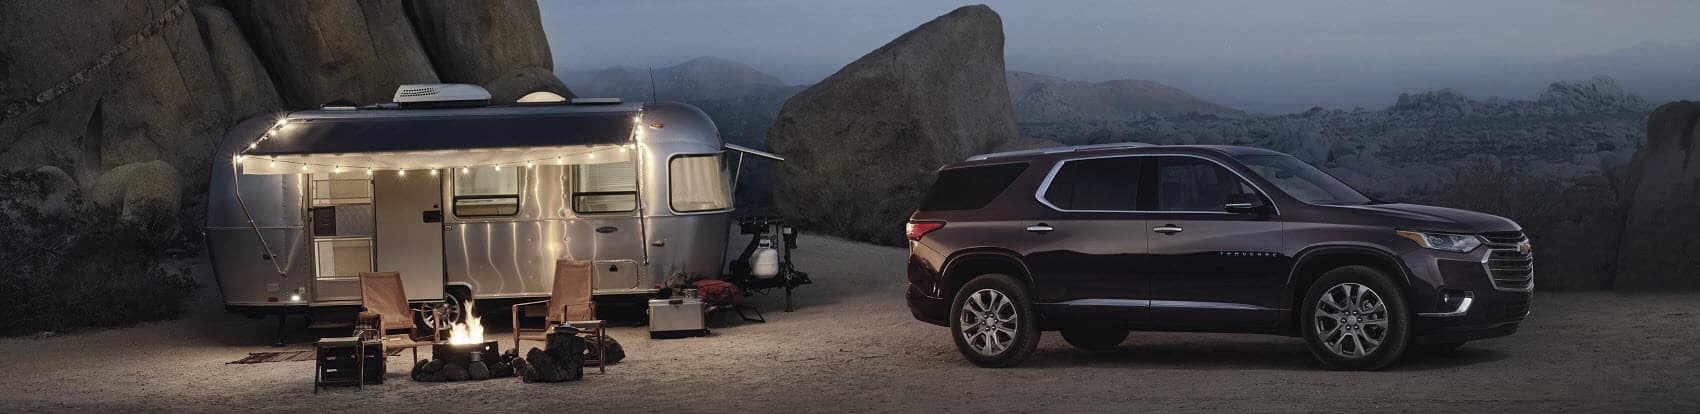 Chevrolet Traverse Camping